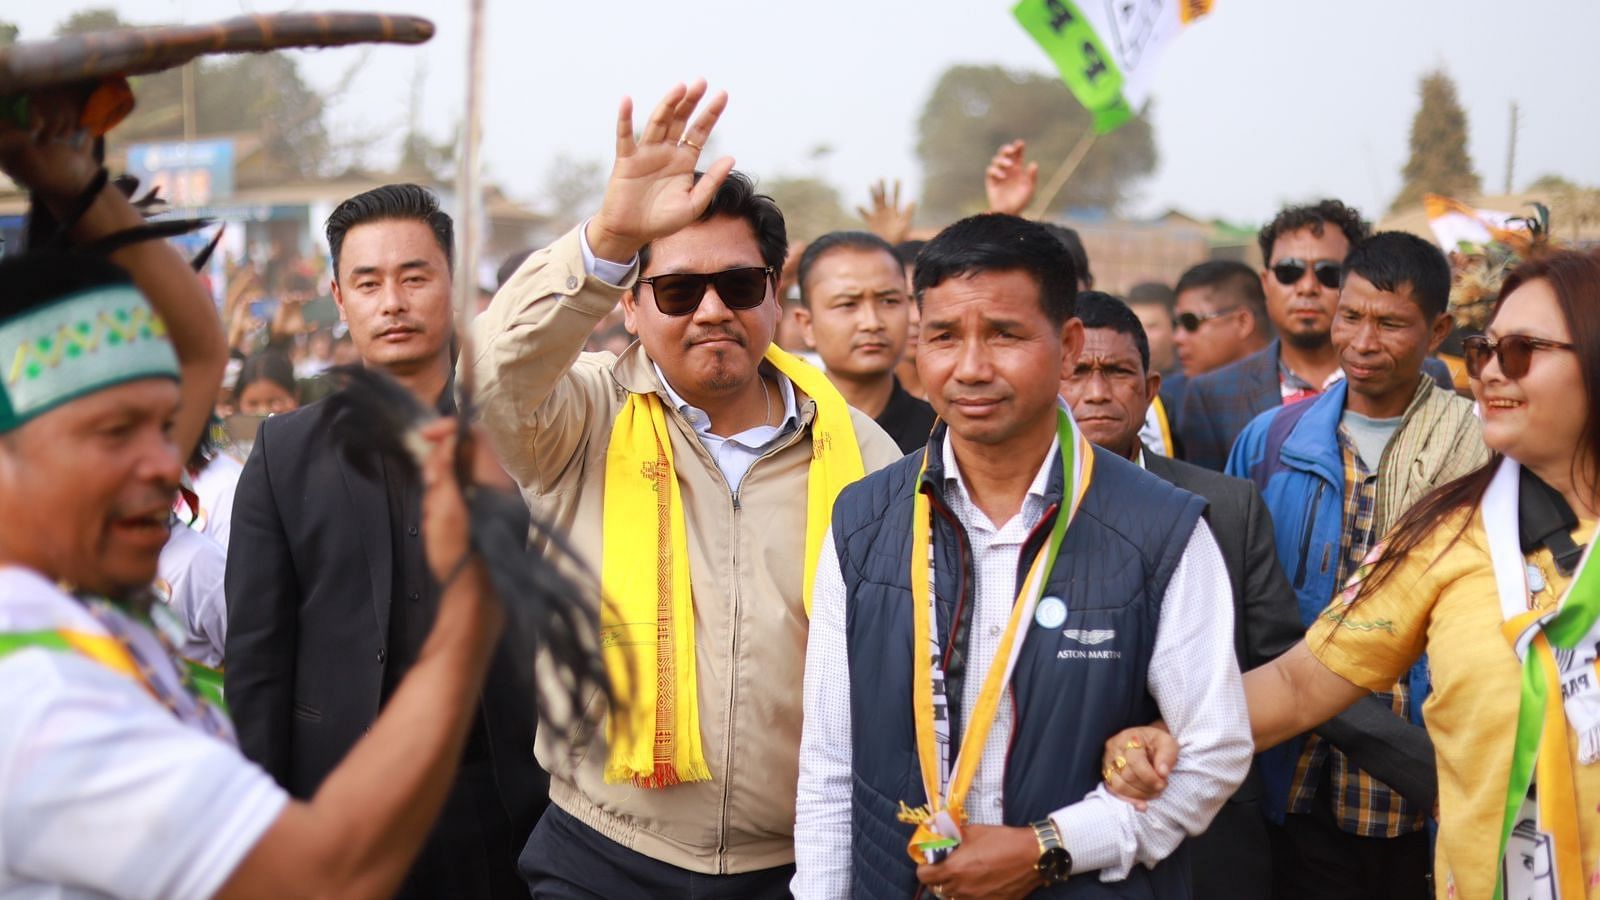 NPP President and Meghalaya CM Conrad K Sangma during a campaign programme recently. Credit: NPP